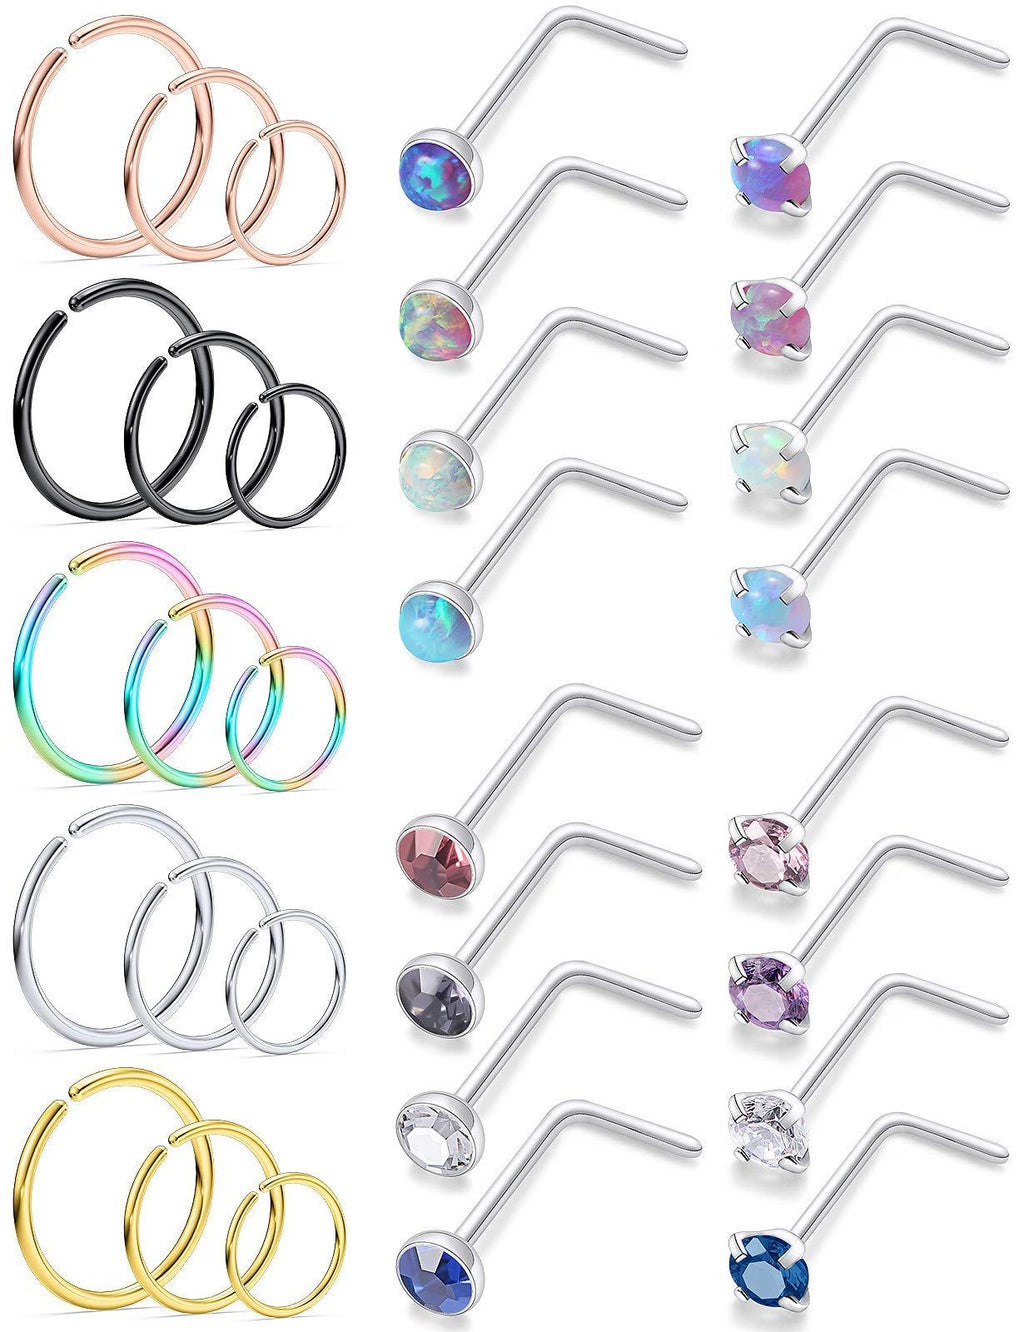 [Australia] - Boernfnso 20G Nose Rings for Women Nose Studs Nose Piercing Jewelry Nose Ring Hoop Screw 316L Stainless Steel for Women Men L Shaped Nostril Piercing Jewelry Opal Nose Rings 